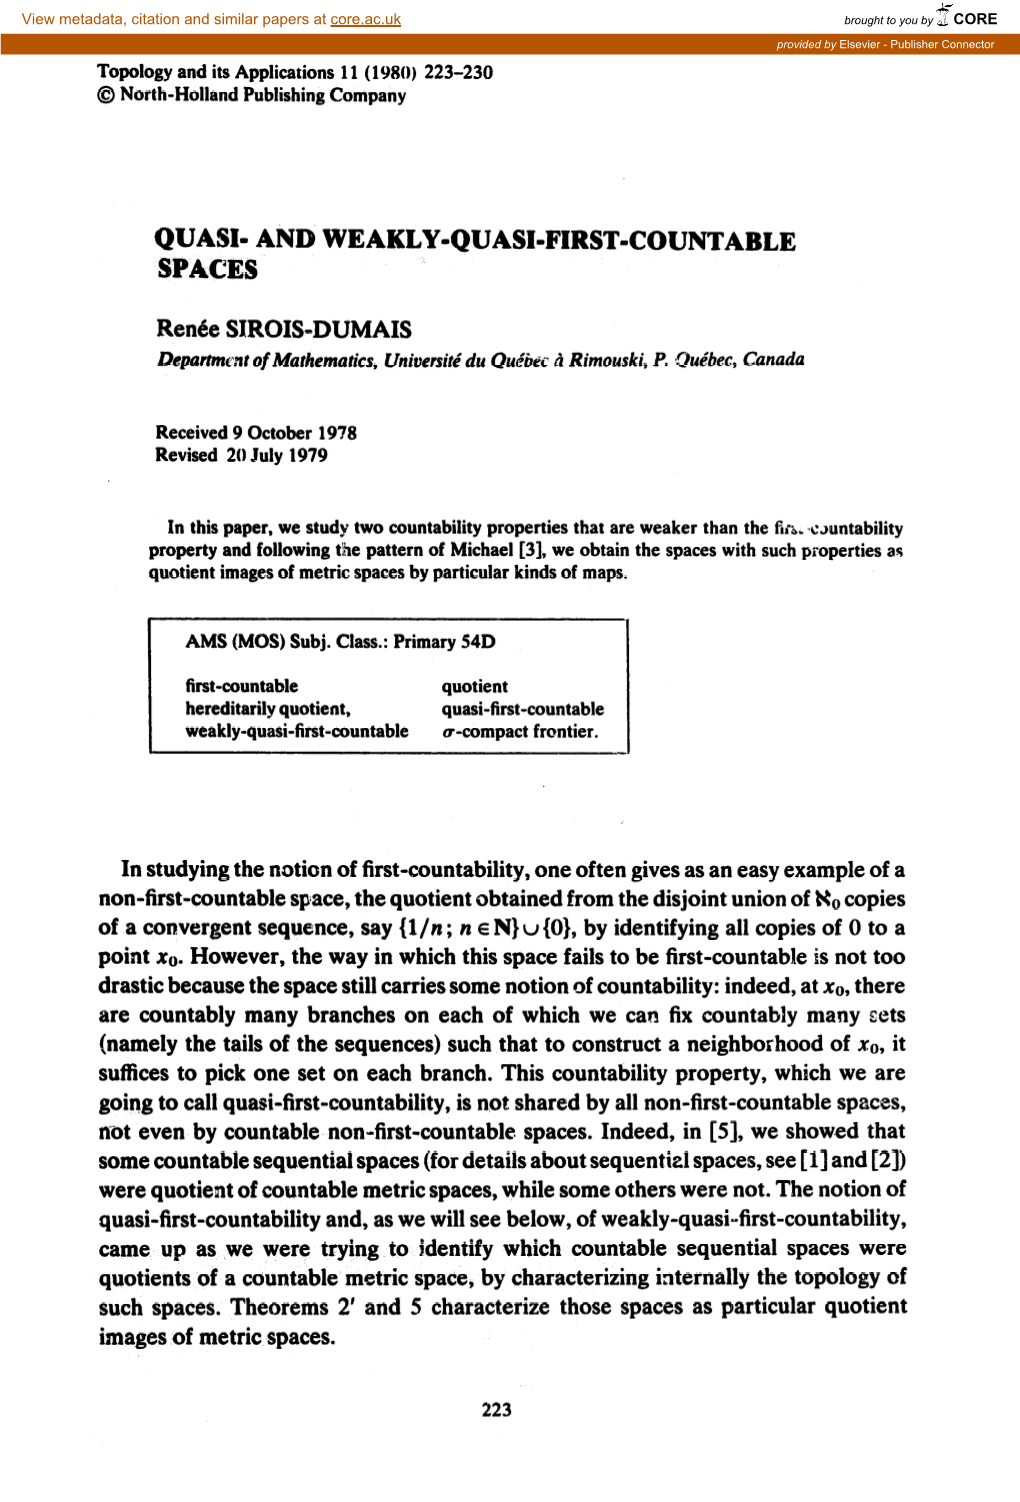 Quasi- and Weakly-Quasi-First-Countable Spaces